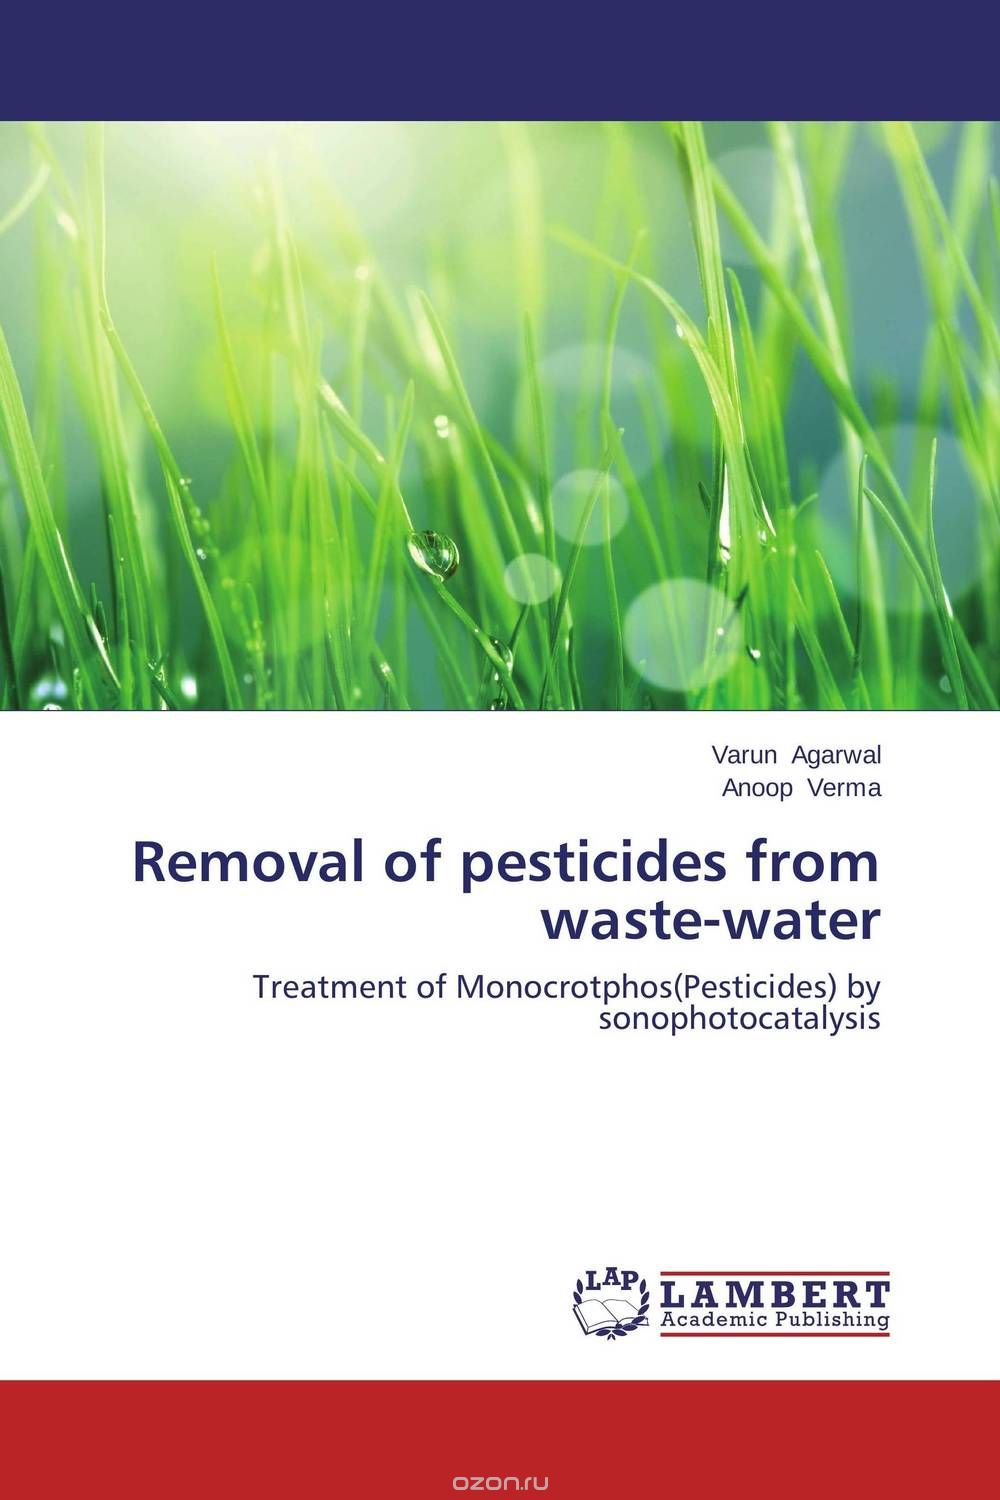 Скачать книгу "Removal of pesticides from waste-water"